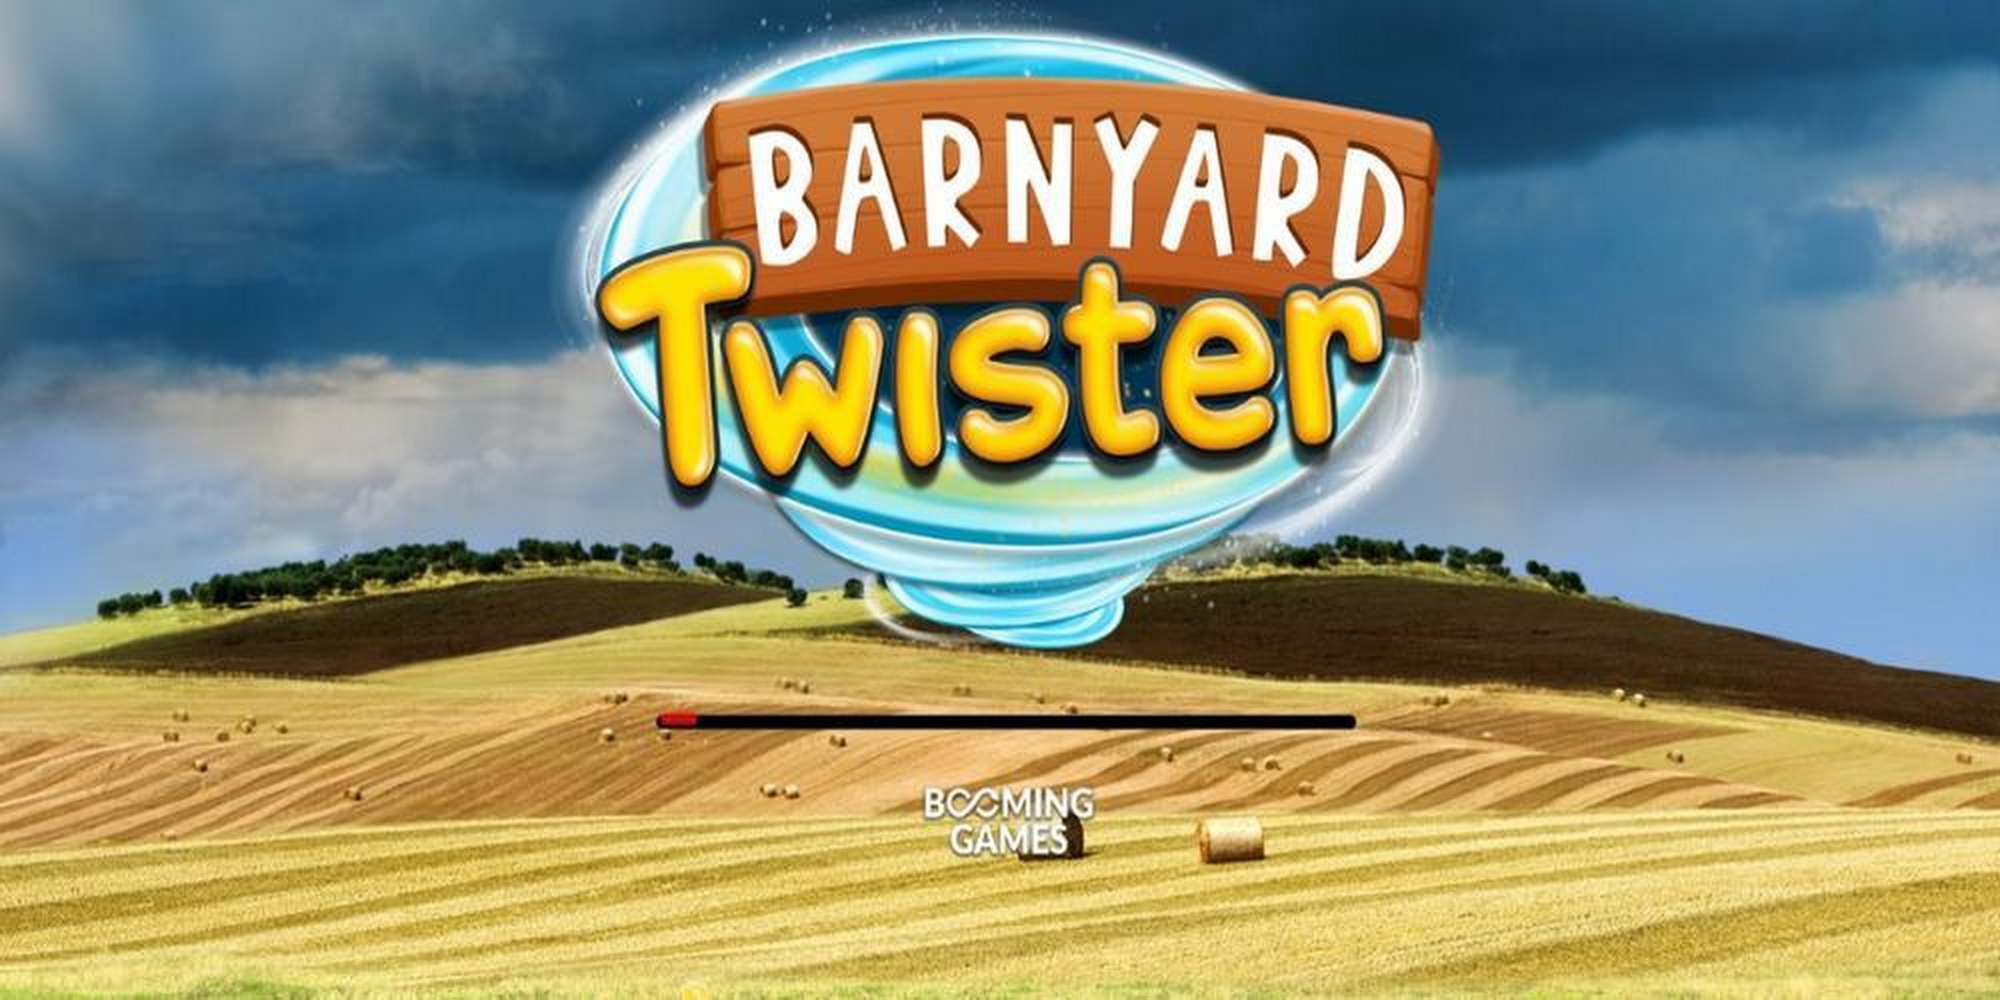 The Barnyard Twister Online Slot Demo Game by Booming Games